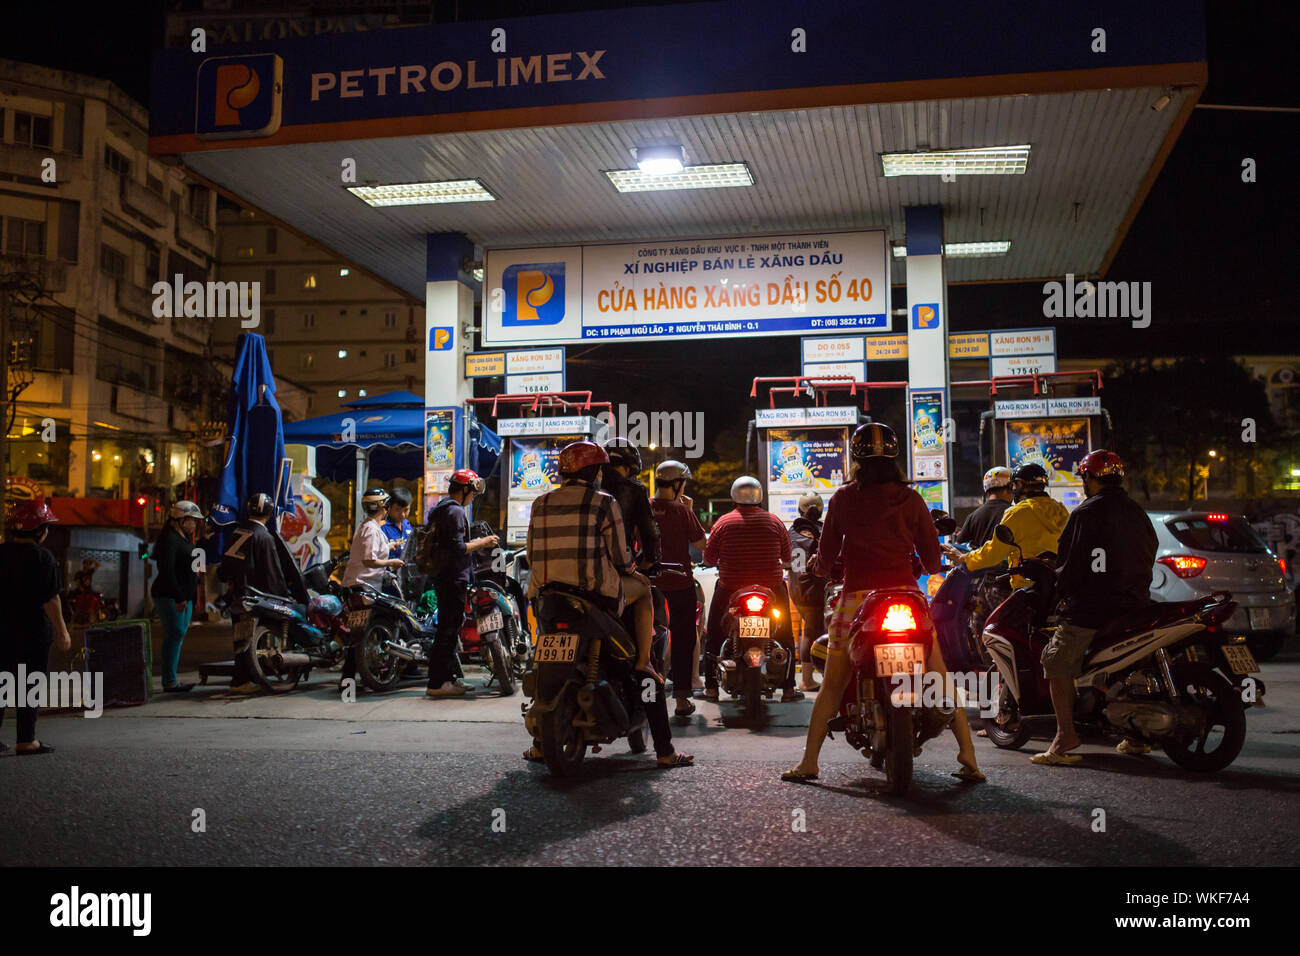 HO CHI MINH CITY, VIETNAM - OCTOBER 31, 2016: People on the streets of Ho Chi Minh City on October 31, 2016, Vietnam. Stock Photo